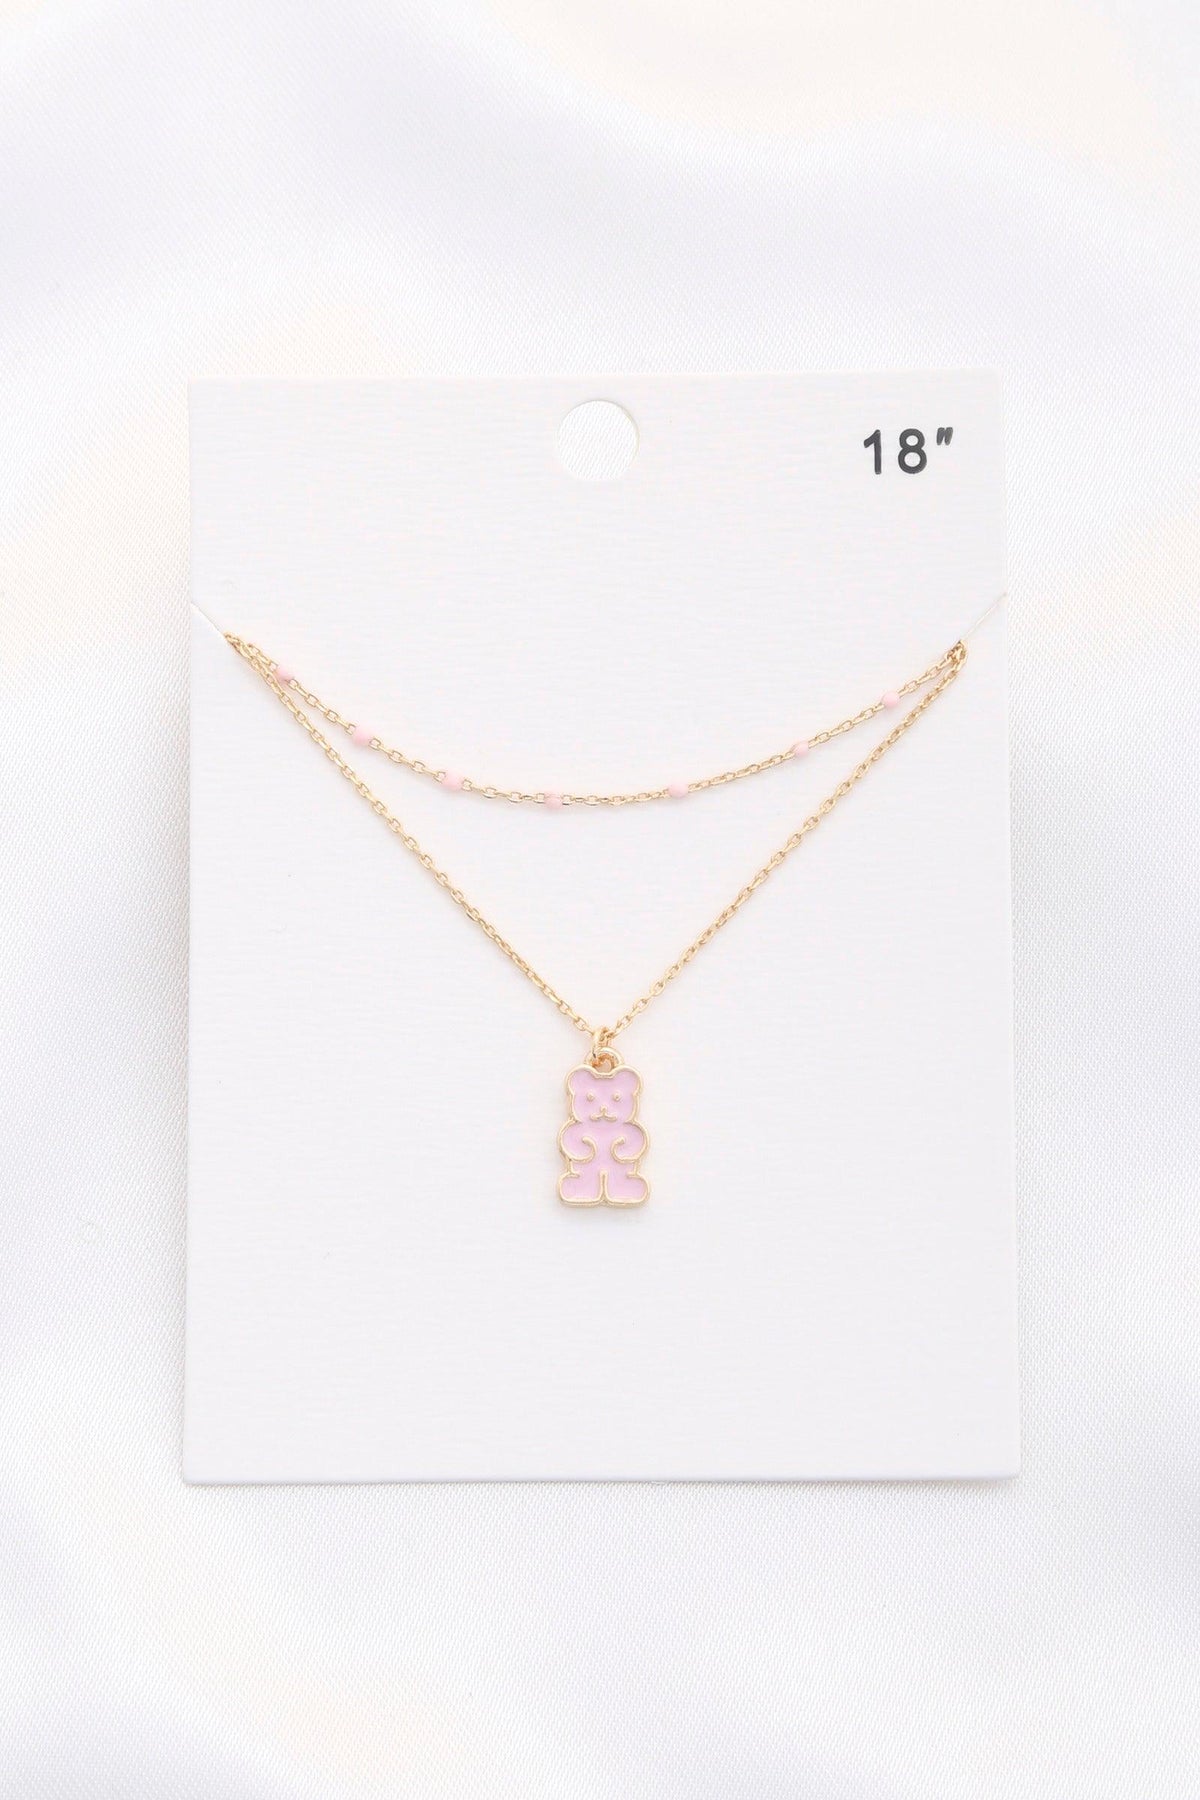 2lyd Teddy Bear Pendant Necklace With Color - Boutique Fashionistah